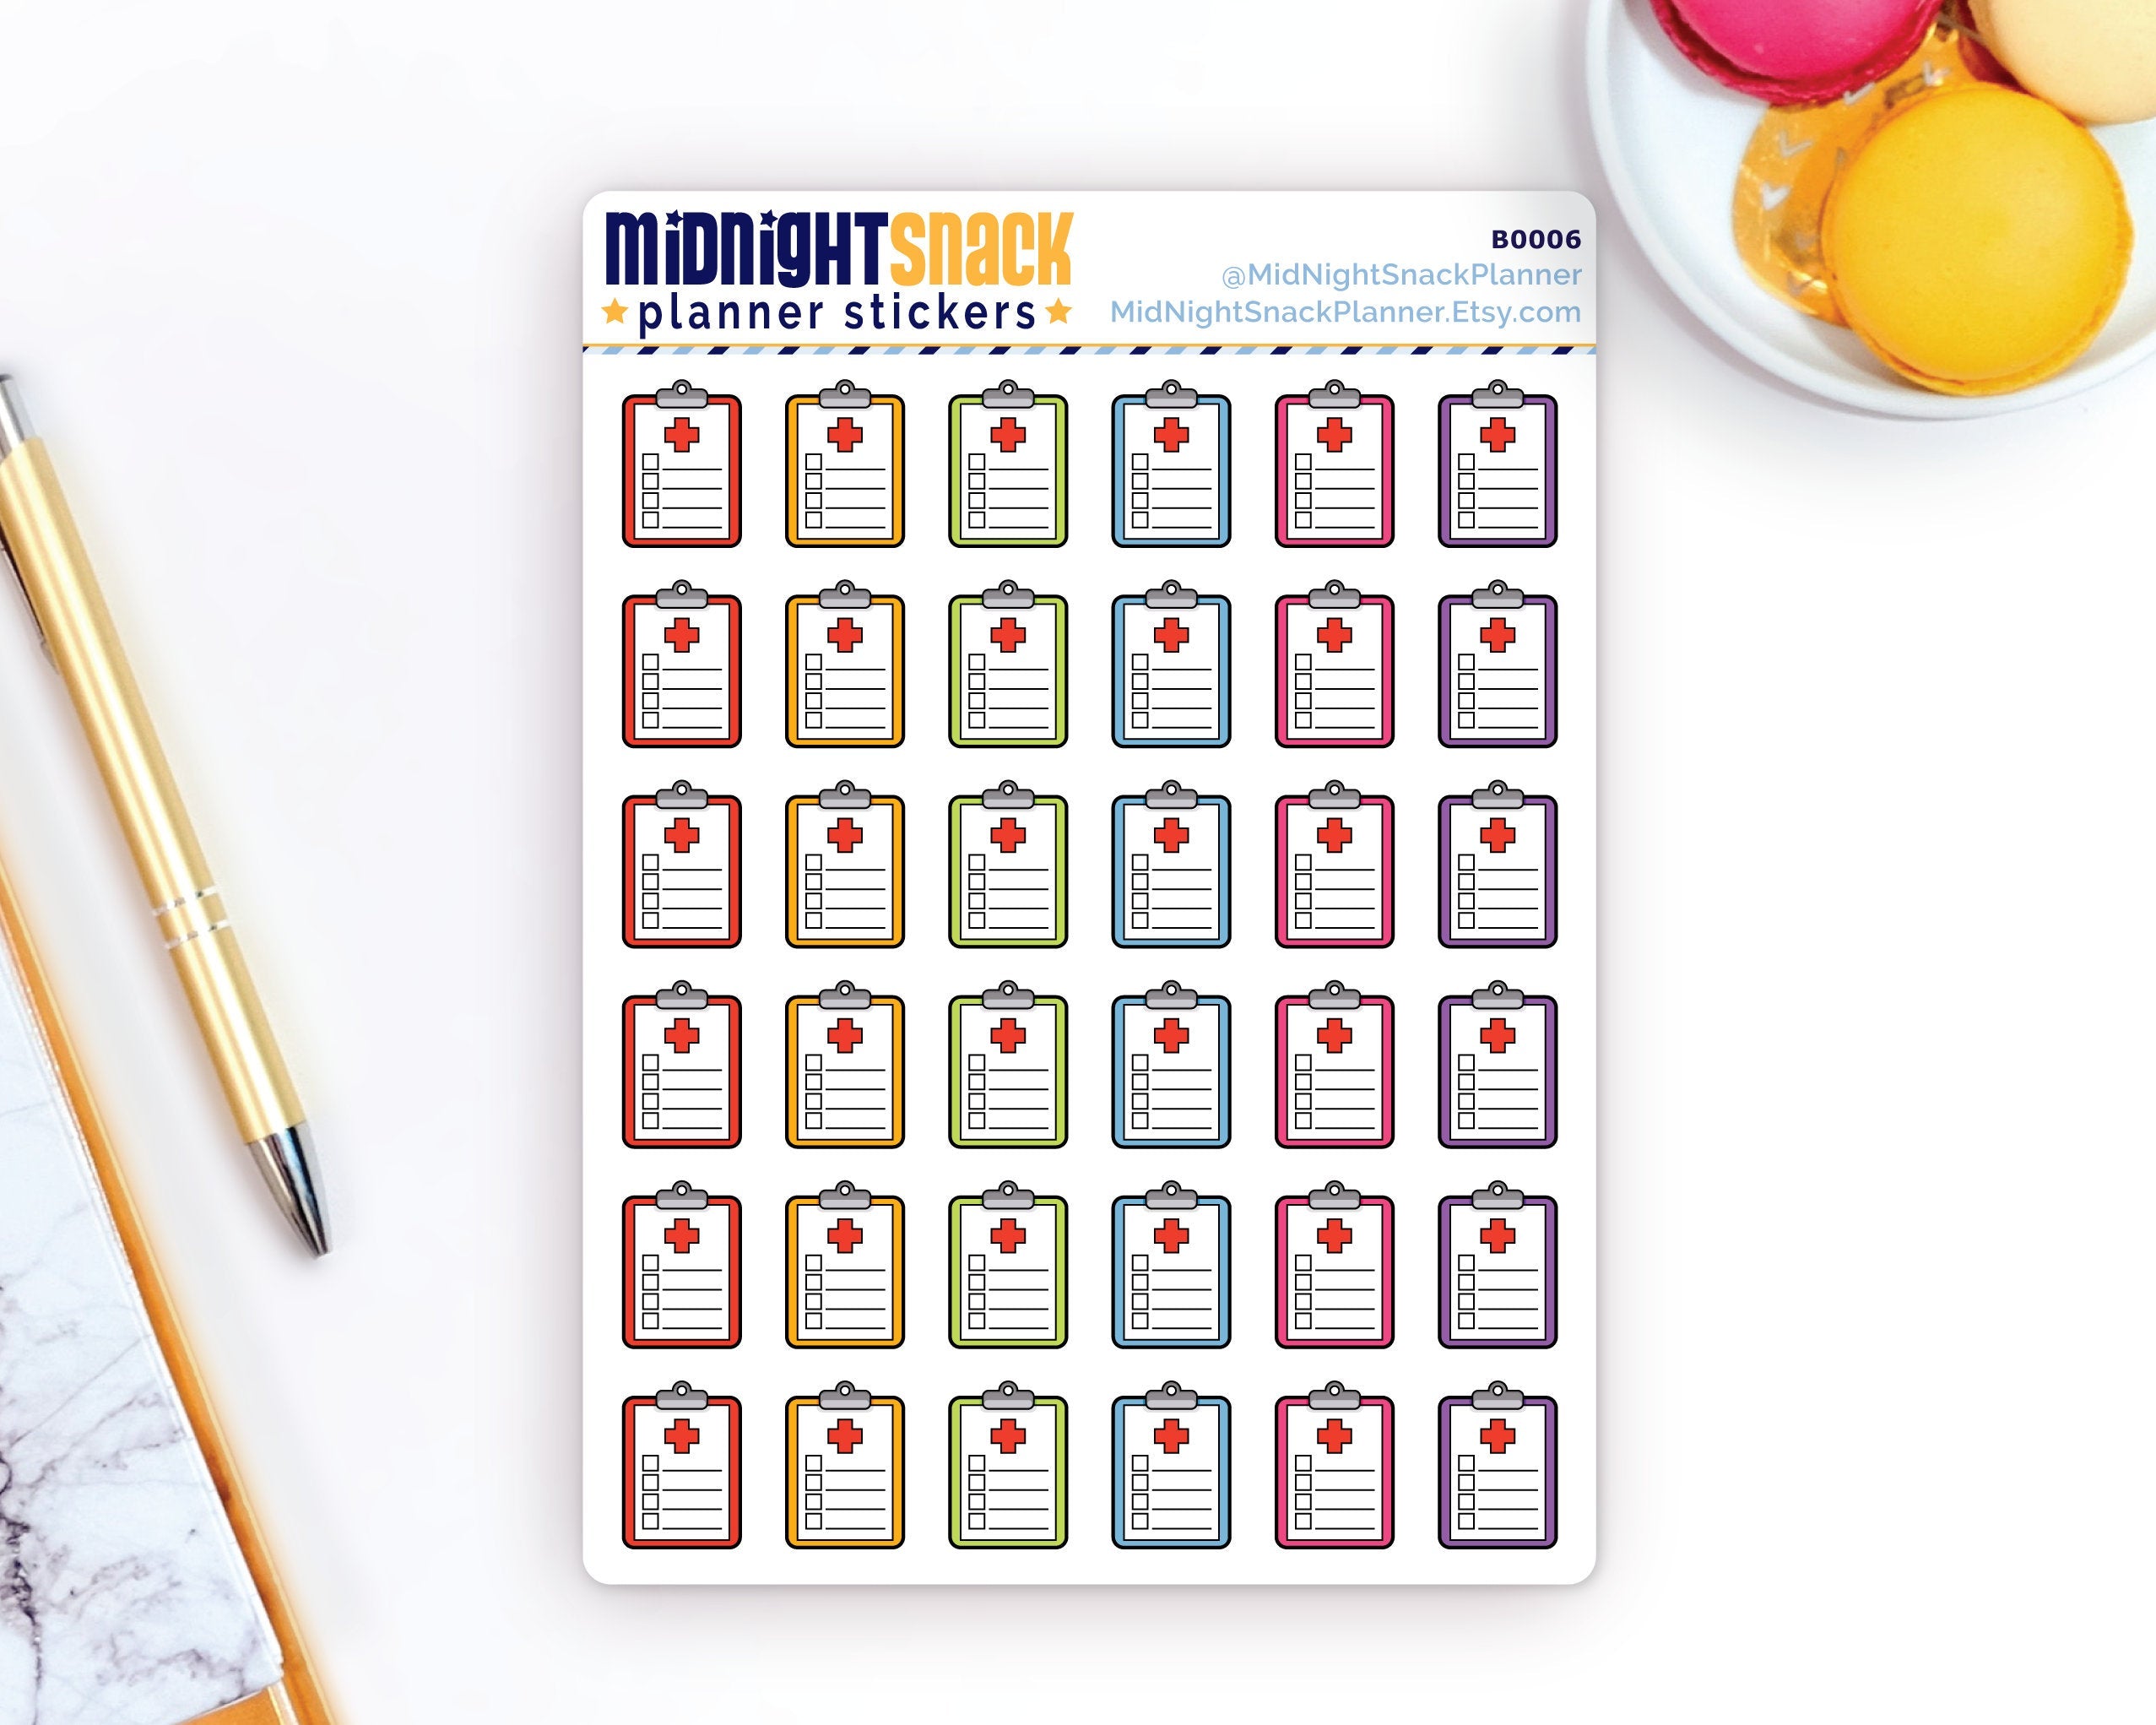 Check-Up Icon: Appointment Reminder Planner Stickers Midnight Snack Planner